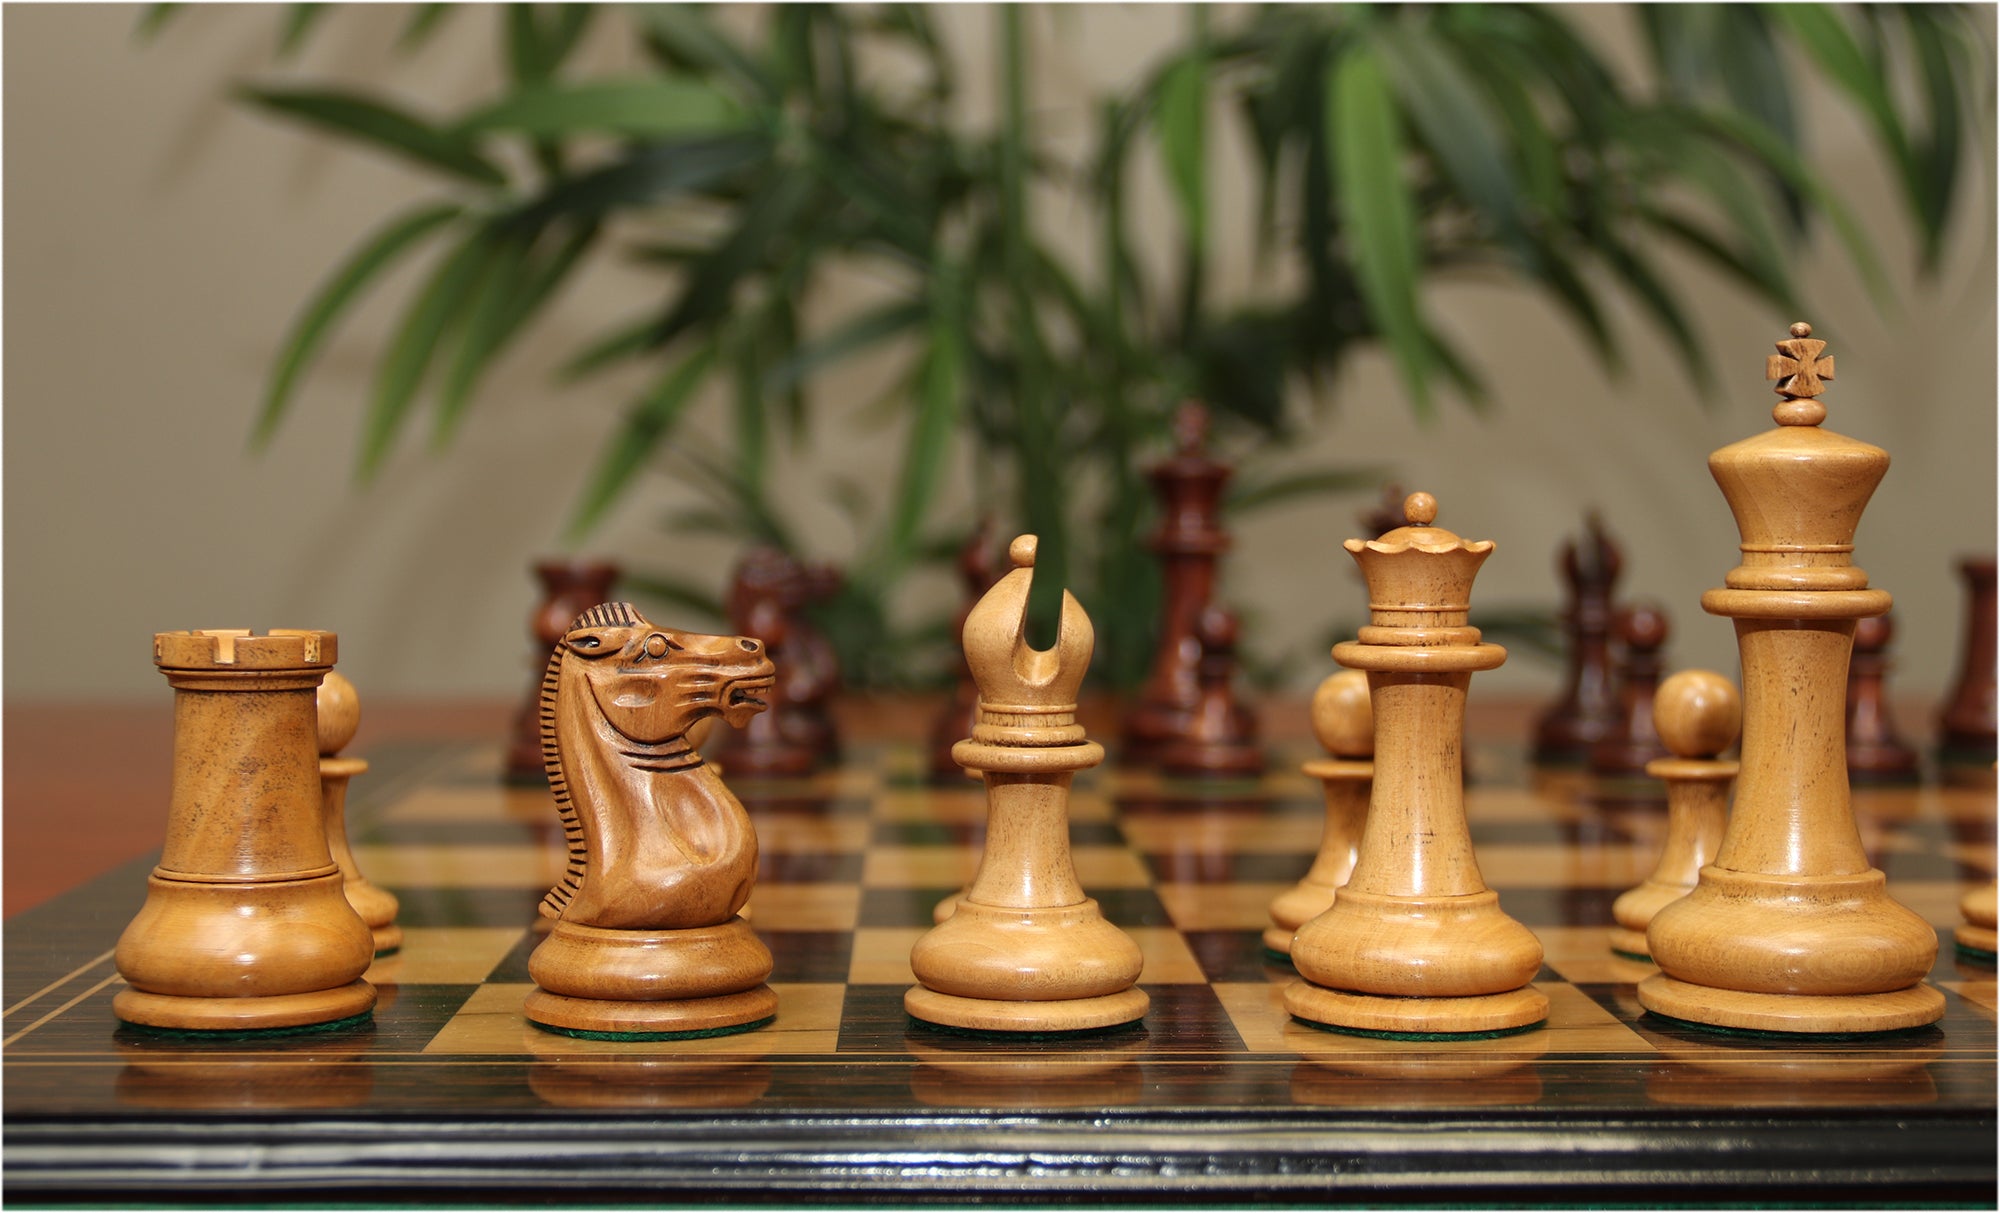 Nathaniel 1849 Antique Reproduction Vintage 4.4" Distressed/Mahogany Wood Chess Pieces